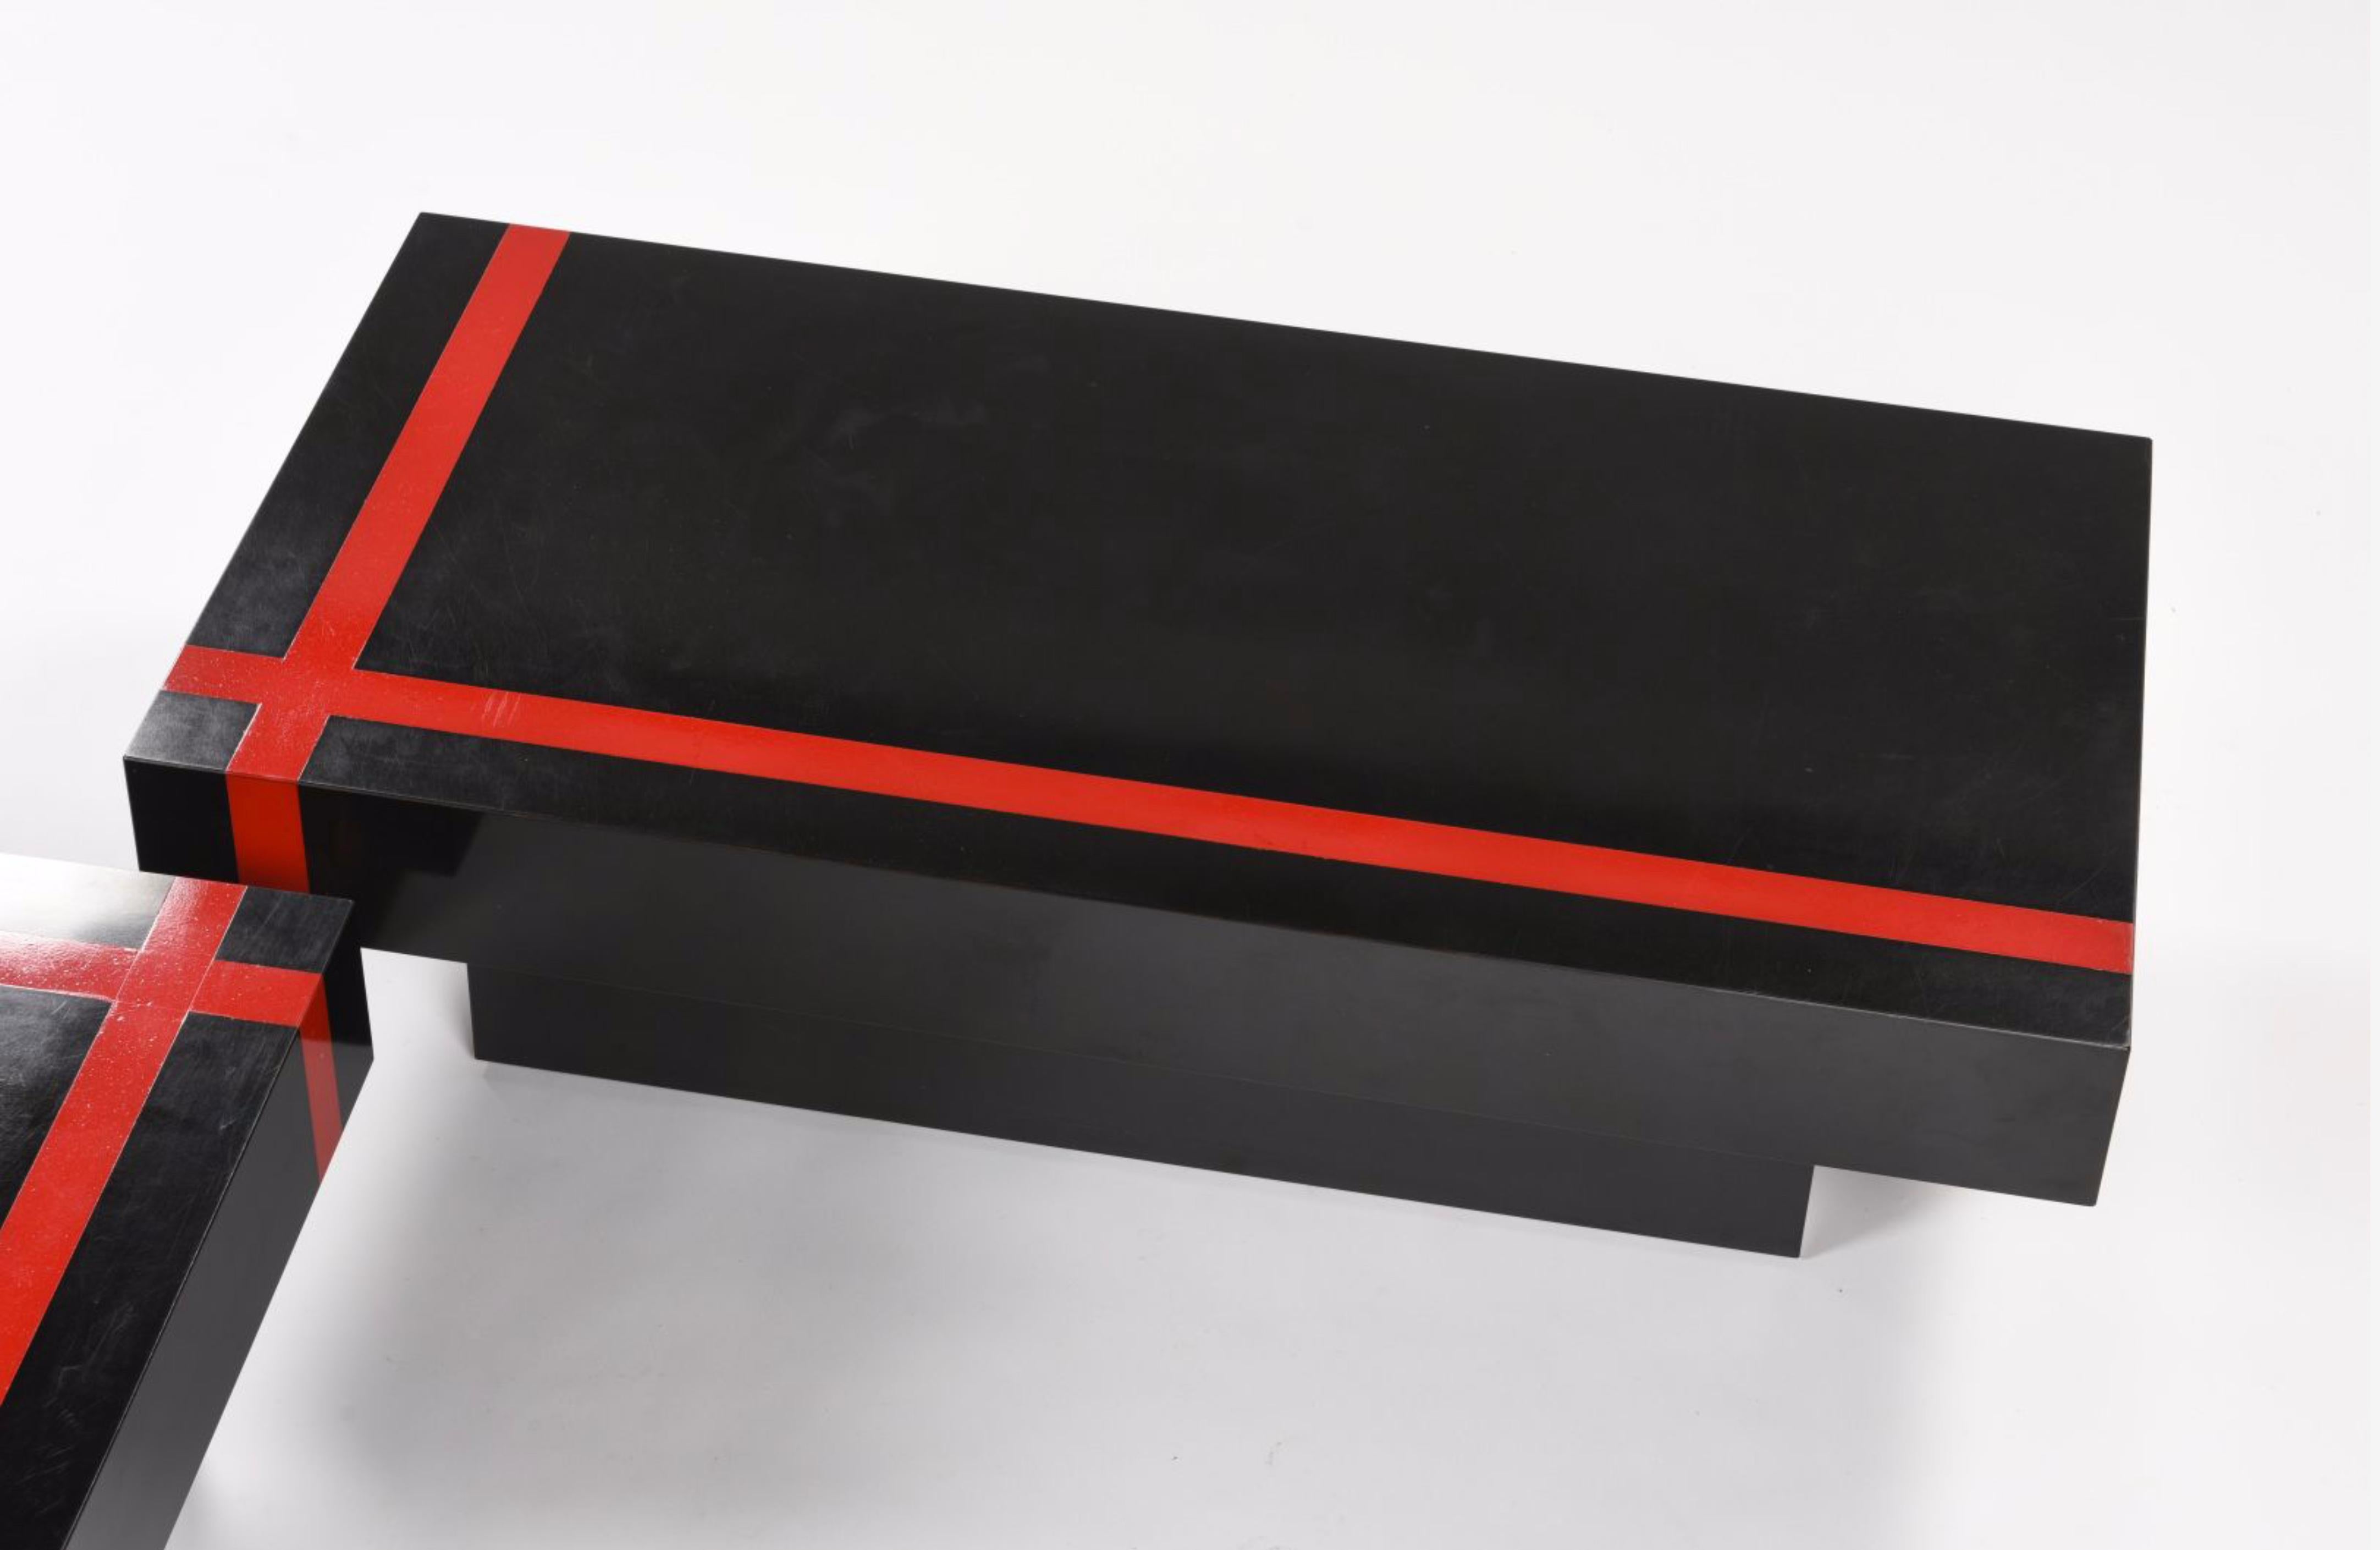 Two Modular Coffee Tables, Red Black, France. 1970 Mid-Century Wood Mid century For Sale 2